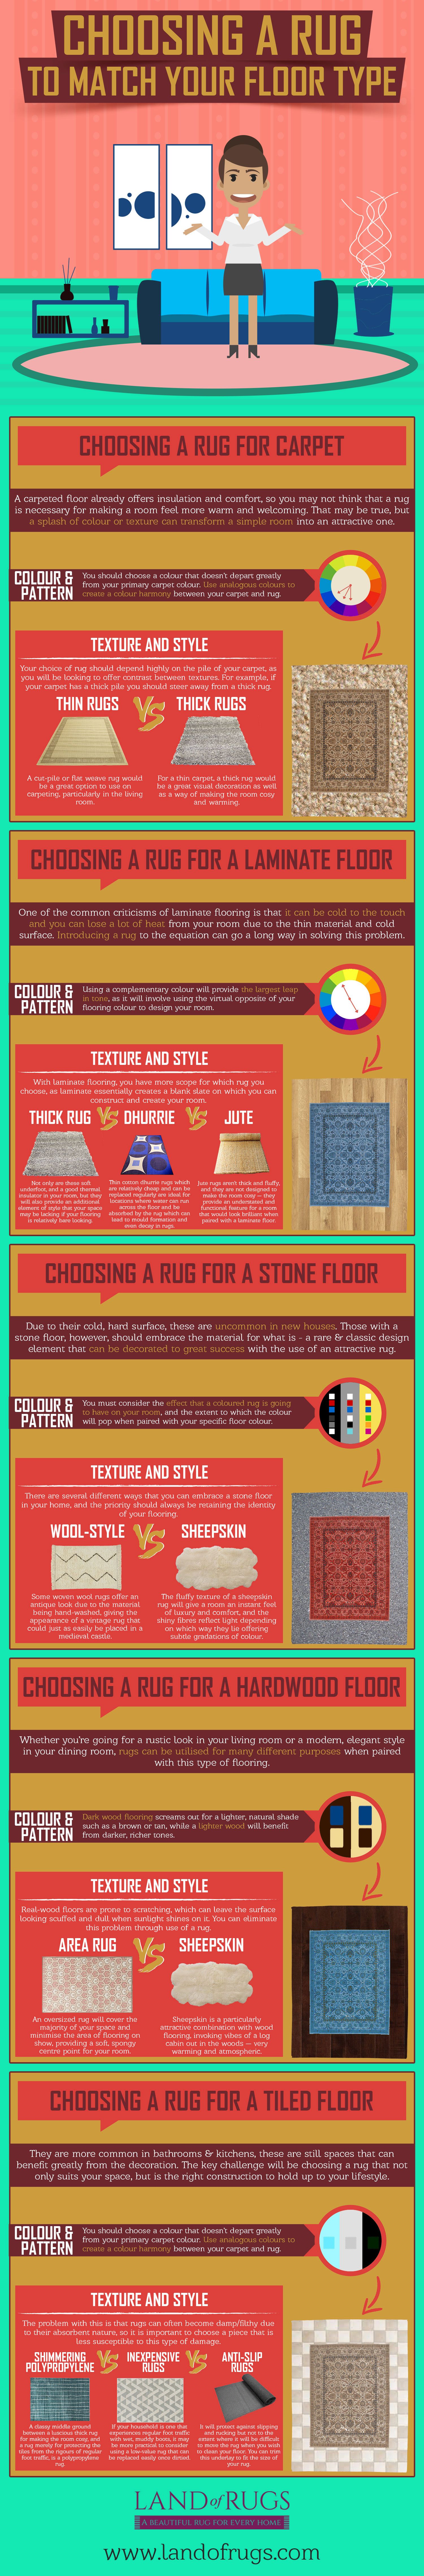 CHOOSING-A-RUG-TO-MATCH-YOUR-FLOOR-TYPE